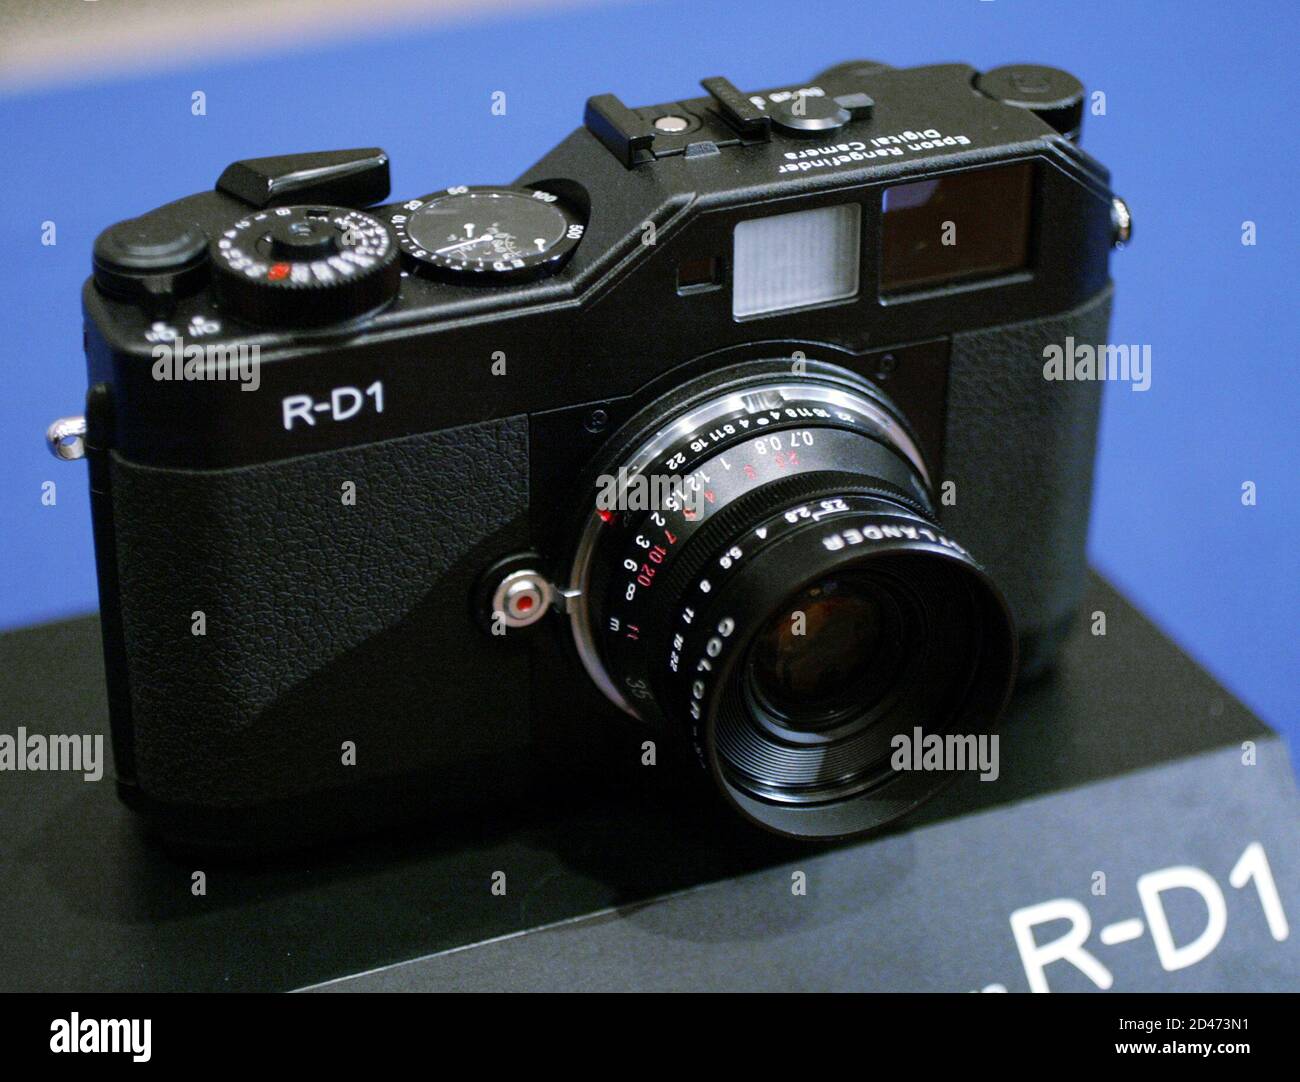 Seiko Epson Corporation's world's first rangefinder digial camera R-D1 is  displayed at a launch in Tokyo March 11, 2004. The  digital  camera, developed by Epson in partnership with Cosina Corp, accepts